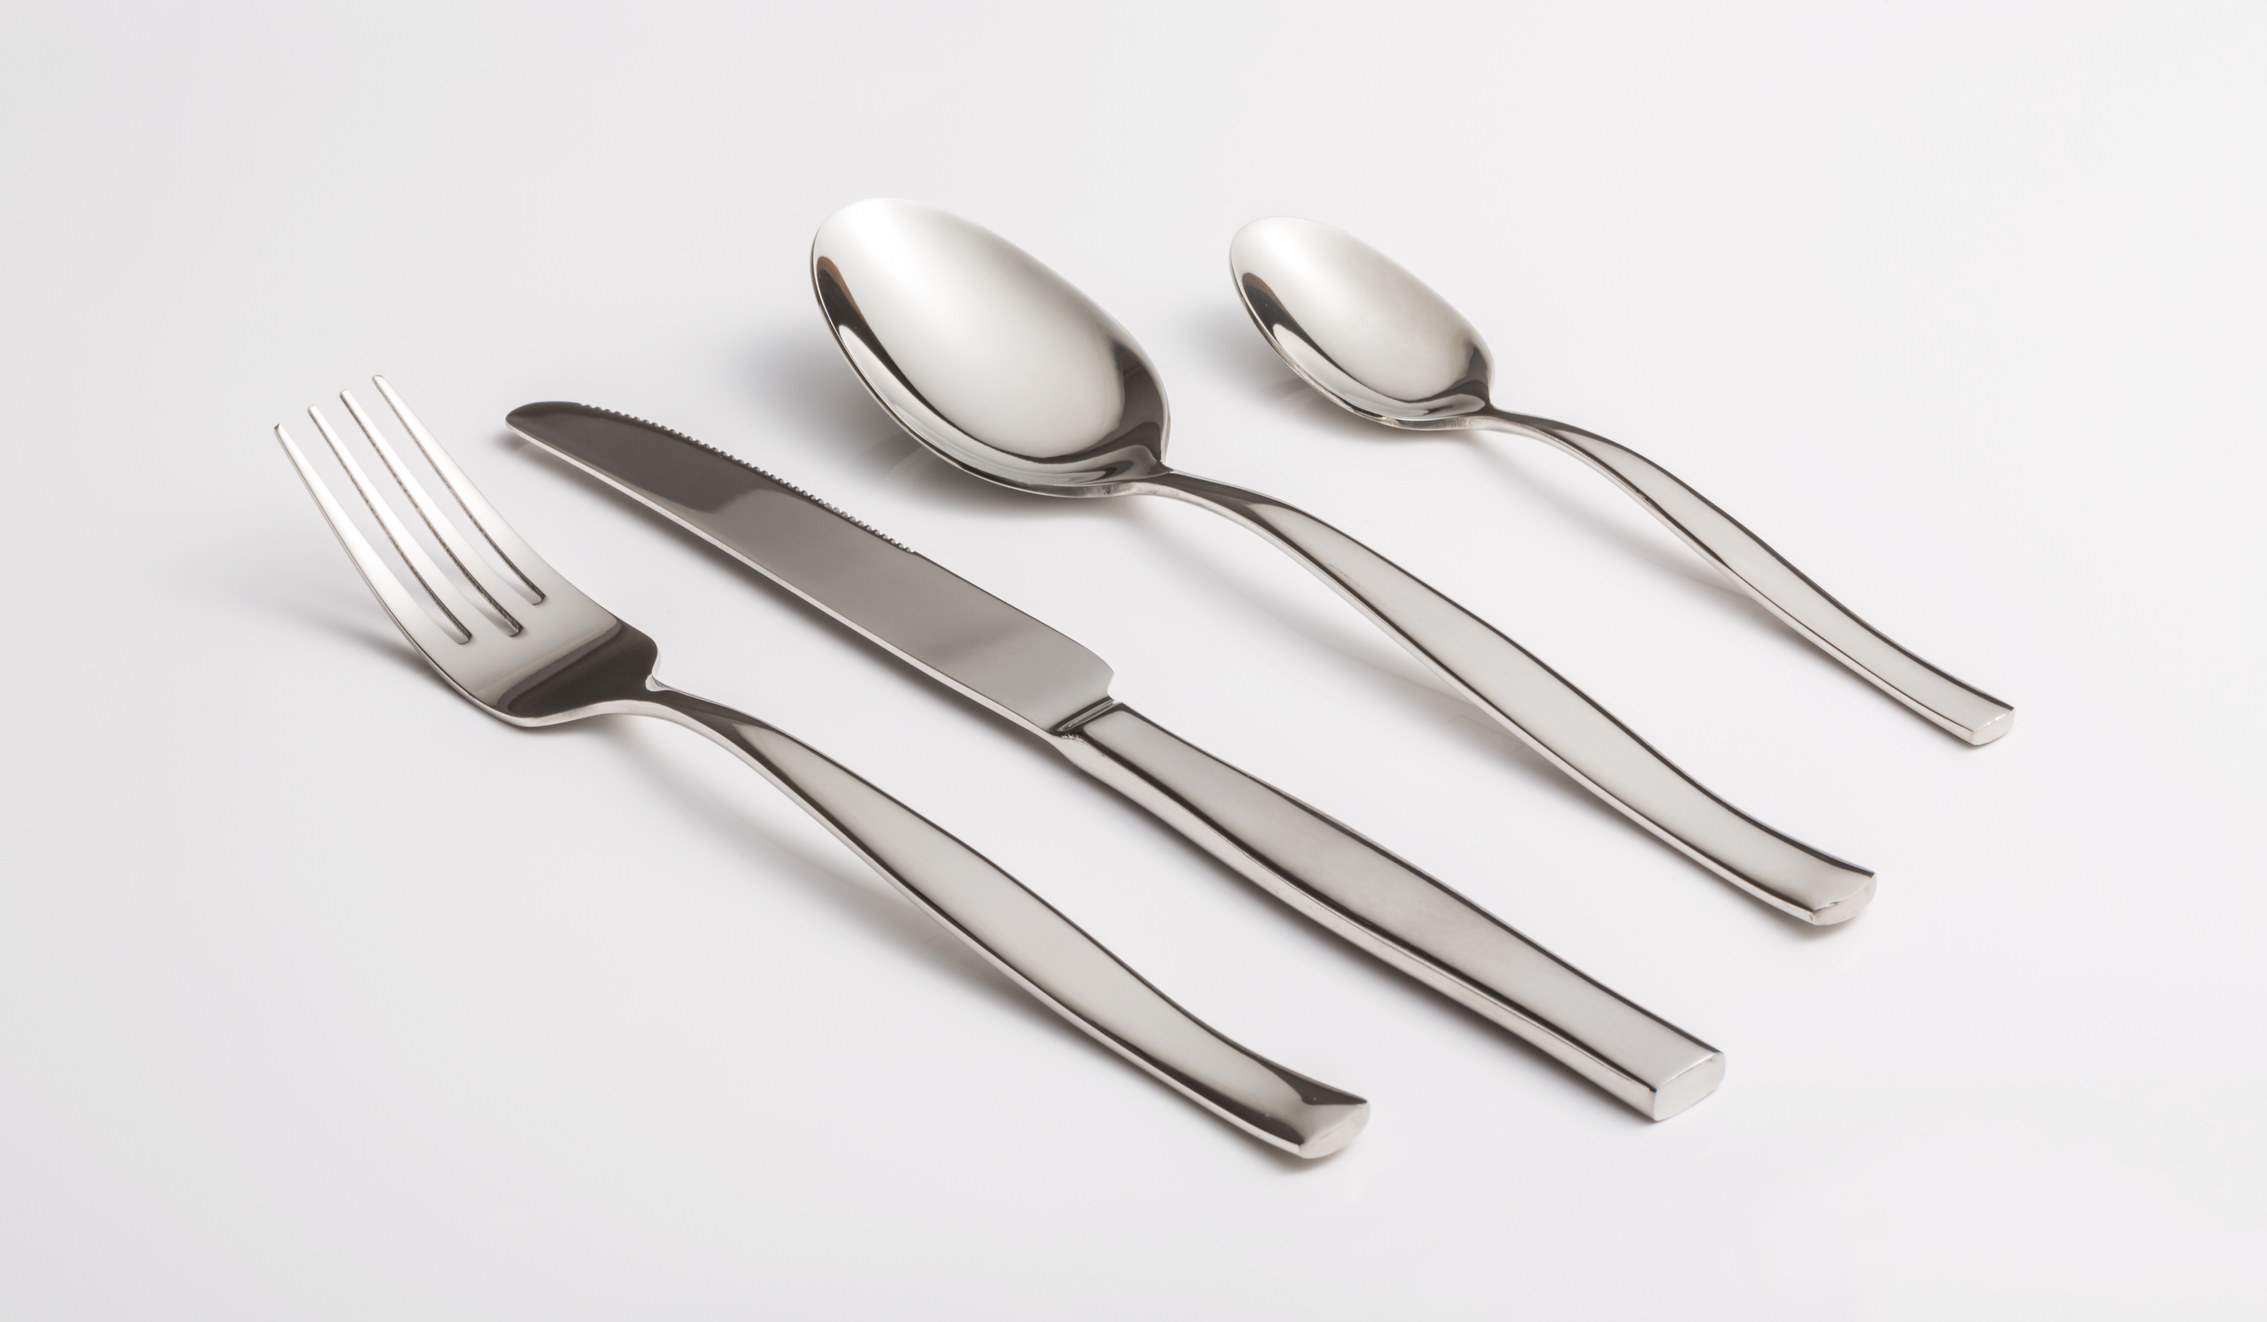 Set of utensils, featuring a fork, knife, and two spoons, on a table